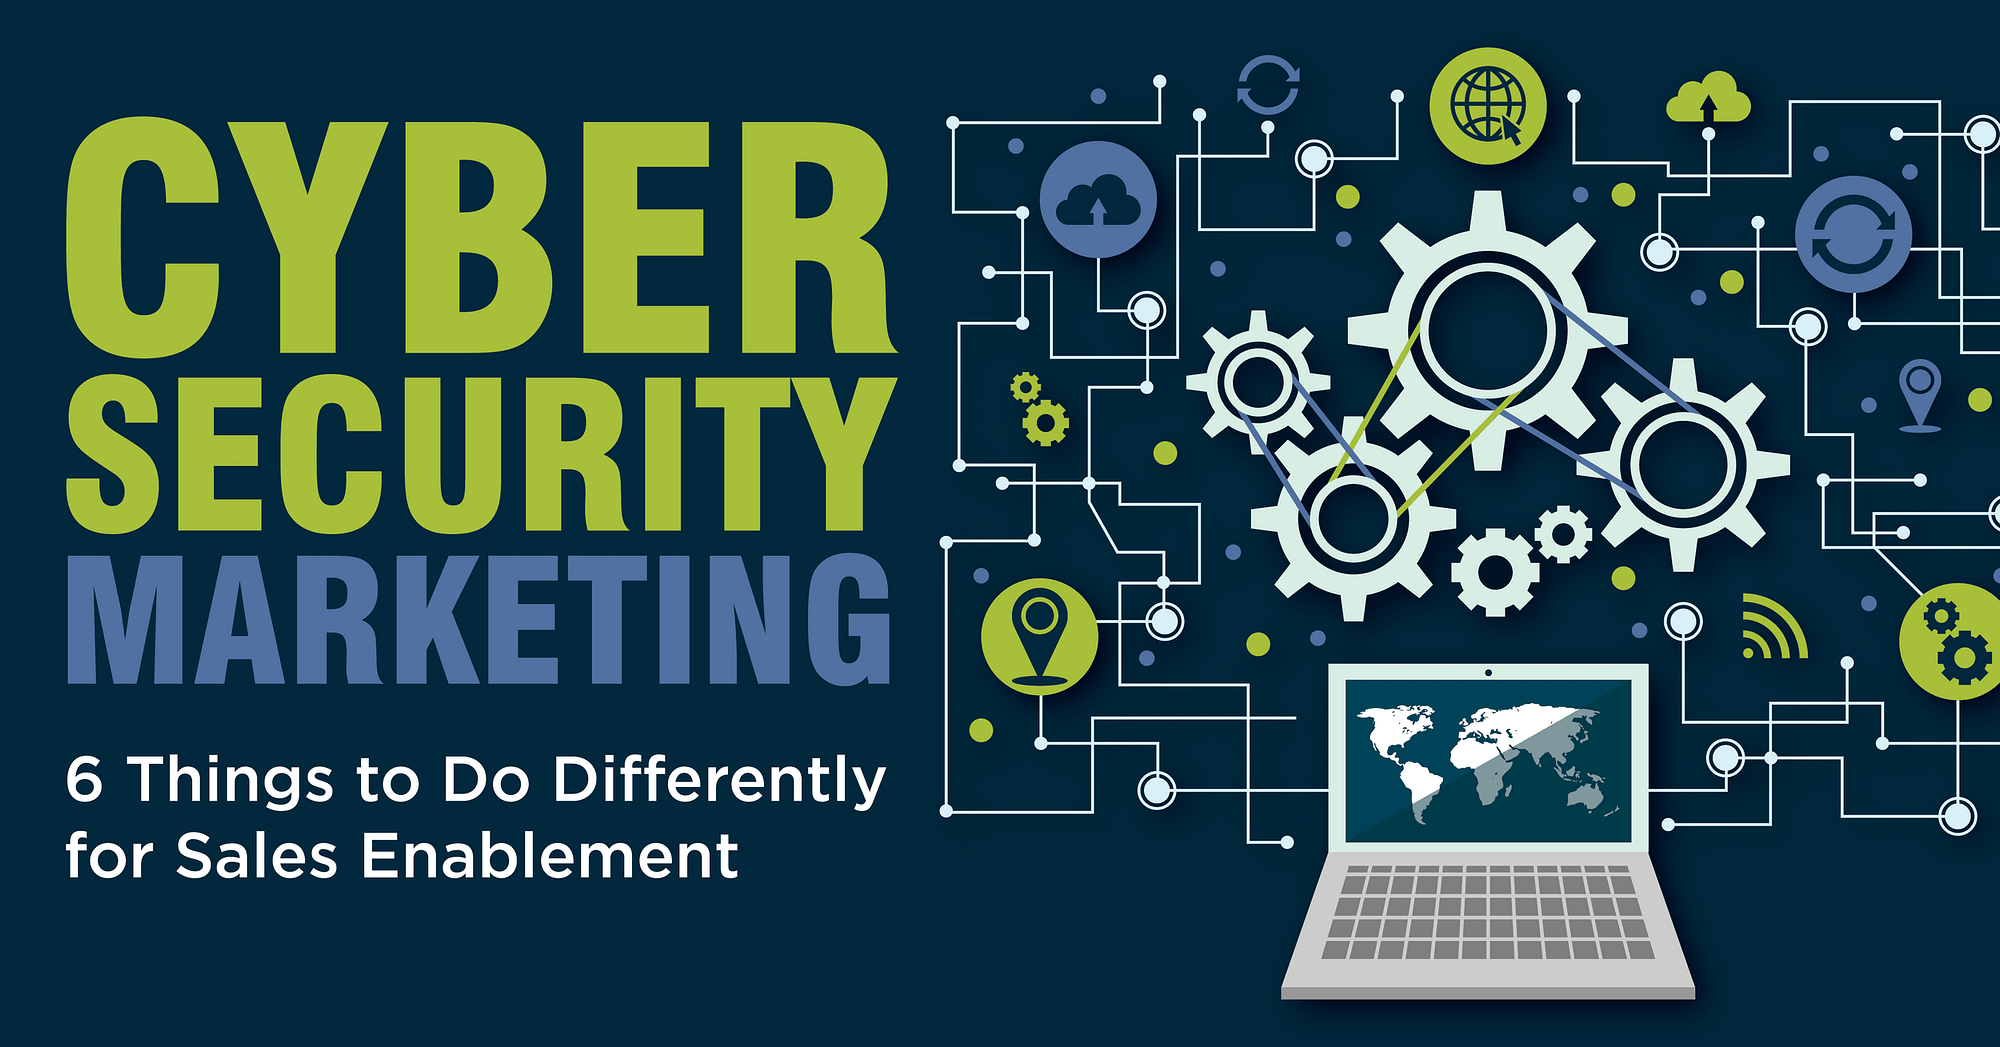 cybersecurity marketing sales enablement blog